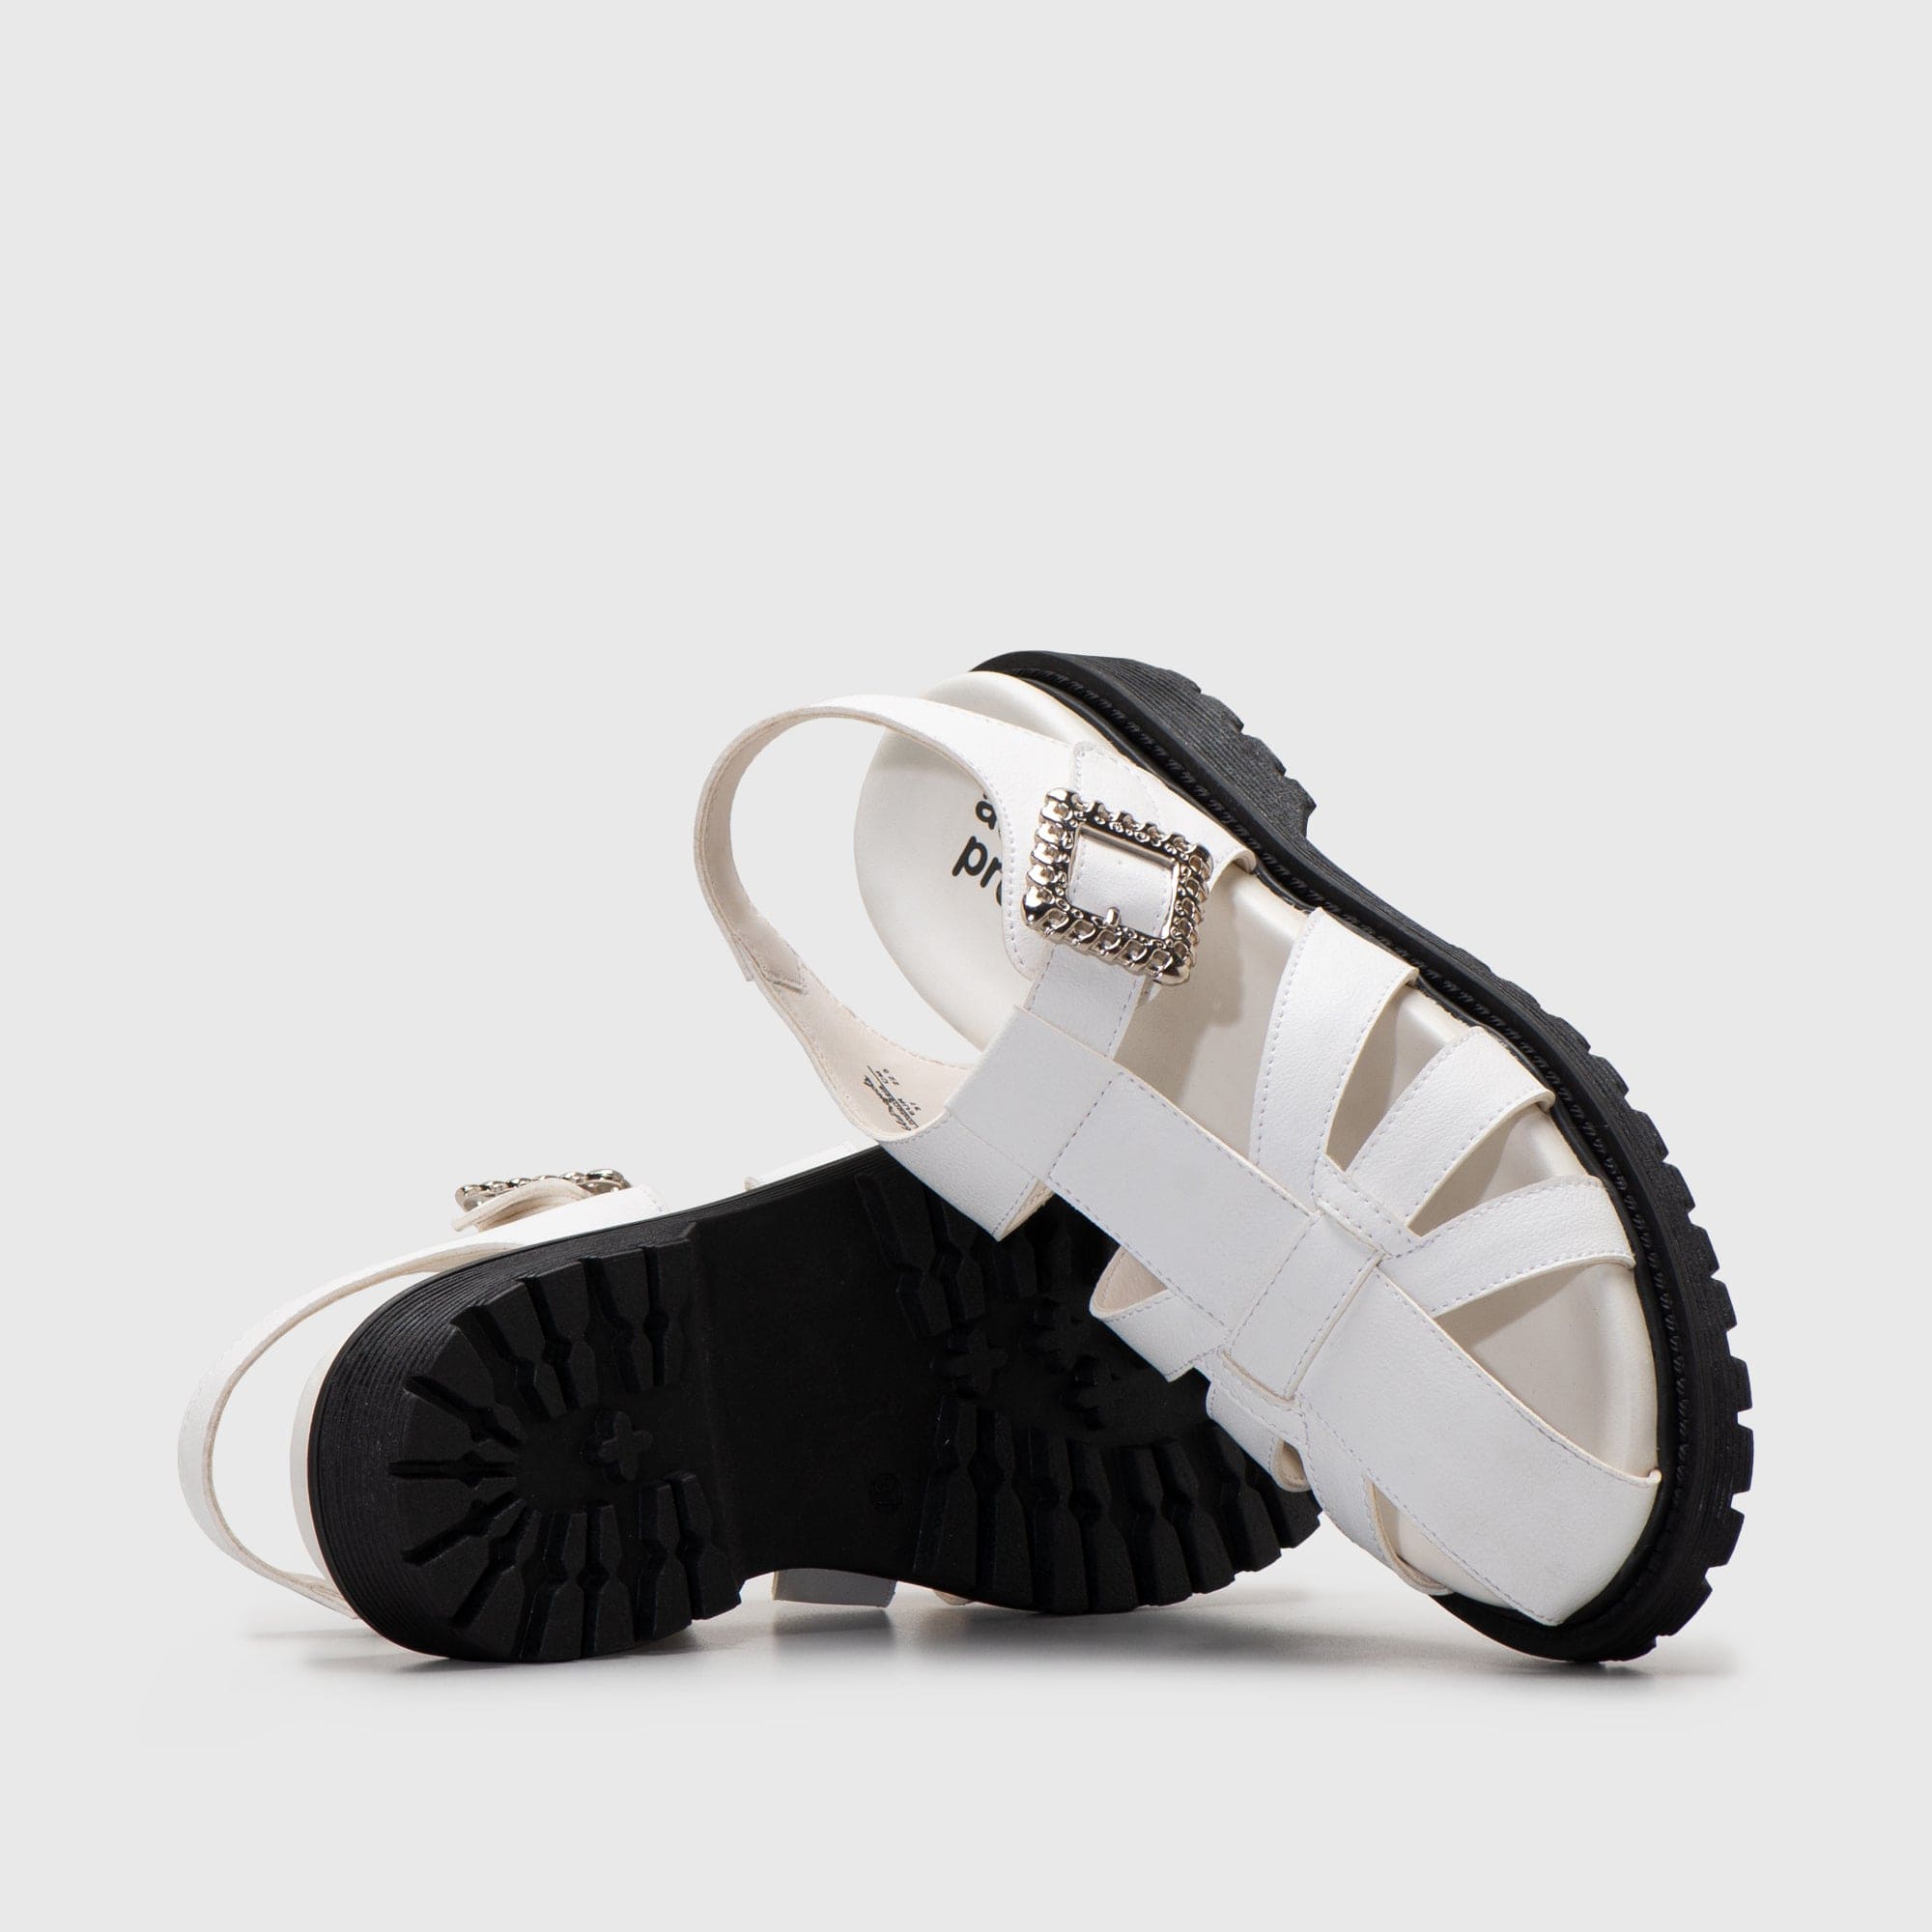 Adorable Projects Official Adorableprojects - Hanza Sandals White - Sandal Wanita